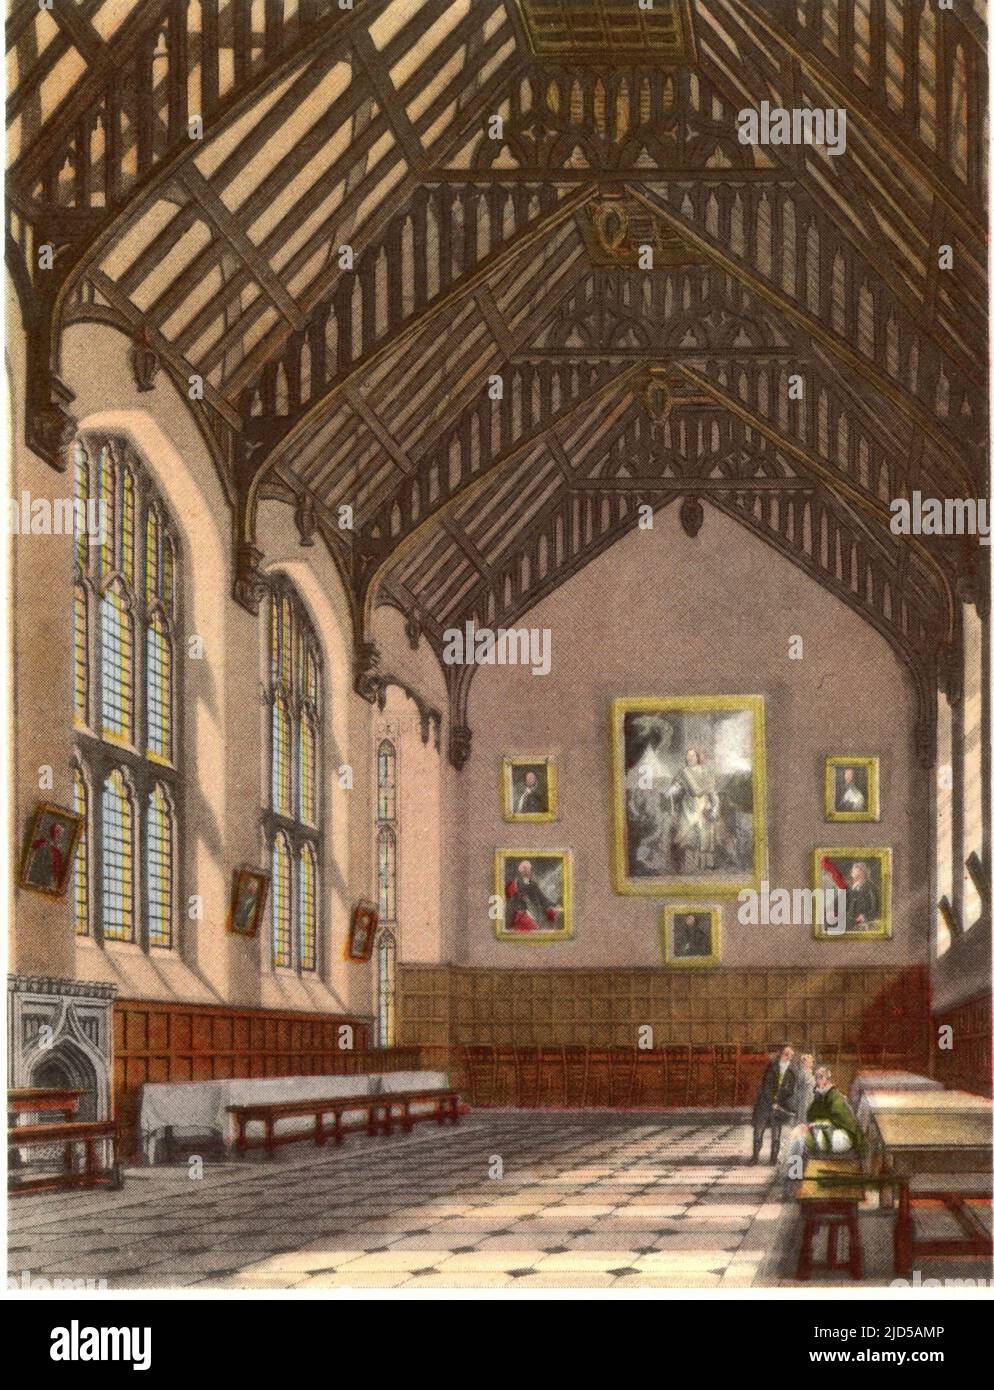 Exeter College Hall, 1814. After Augustus Charles Pugin (1762-1832). Exeter College is one of the constituent colleges of the University of Oxford in Oxford, England. It was founded in 1314 by Walter de Stapledon (1261-1326), Bishop of Exeter. The hall, constructed in 1618, is notable for its vaulted ceilings and numerous portraits. A print from 'A History of the University of Oxford, its Colleges, Halls, and Public Buildings', published by Rudolph Ackermann, 1814. Illustrated by Augustus Pugin, F. Mackenzie and others. Stock Photo